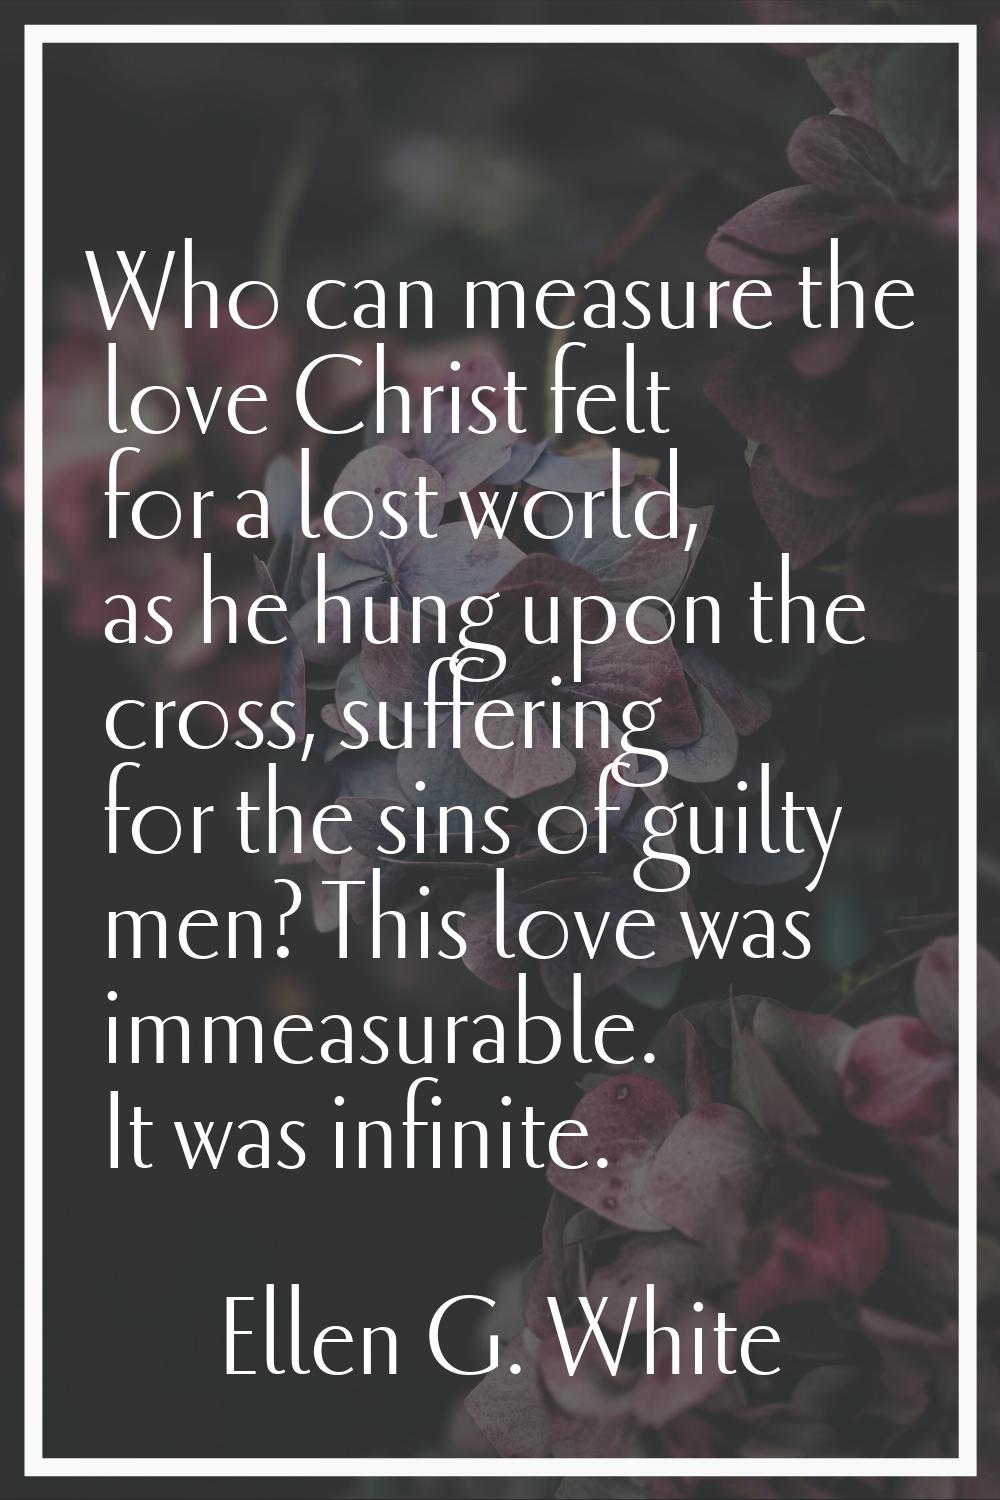 Who can measure the love Christ felt for a lost world, as he hung upon the cross, suffering for the